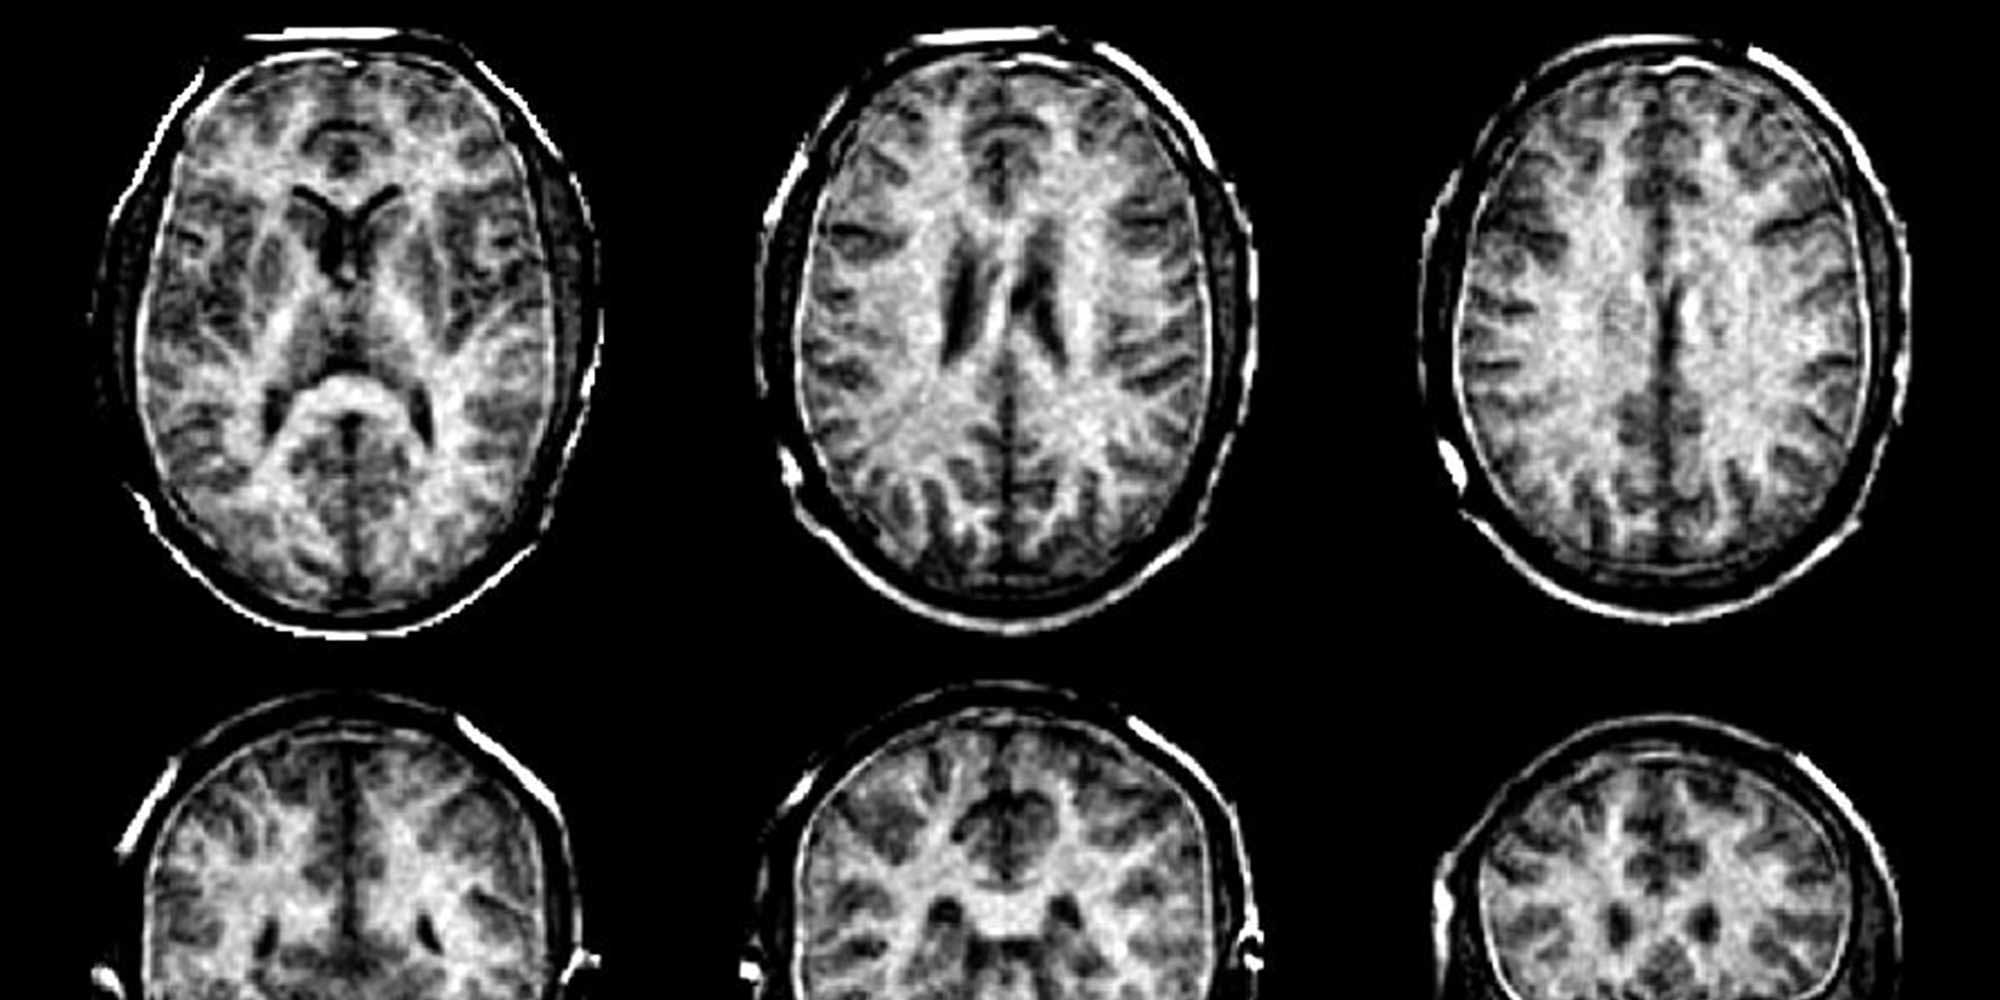 Improved MRI scans of the myelin sheaths in the brain should allow multiple sclerosis to be detected at an early stage